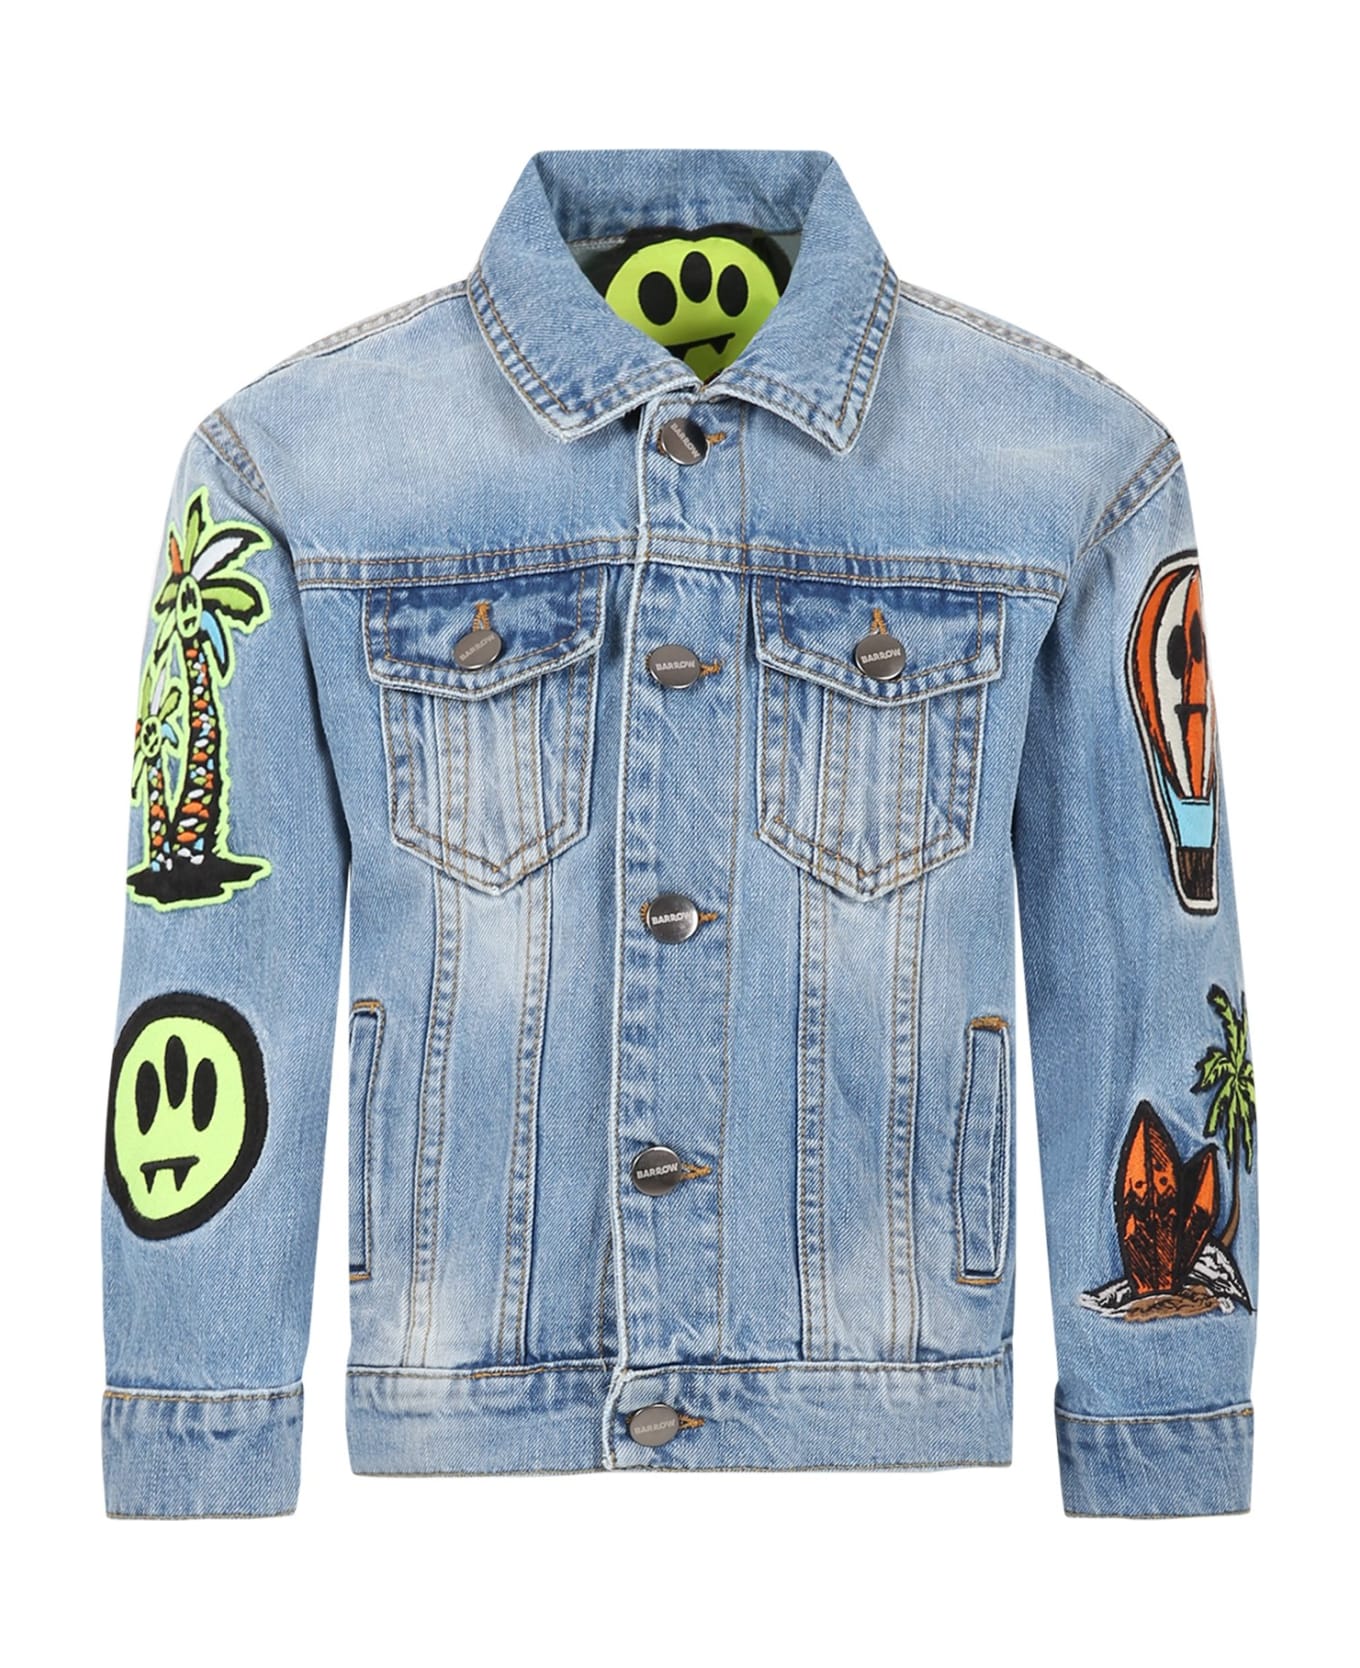 Barrow Light Blue Jacket For Kids With Iconic Smiley And Patch - 200 コート＆ジャケット